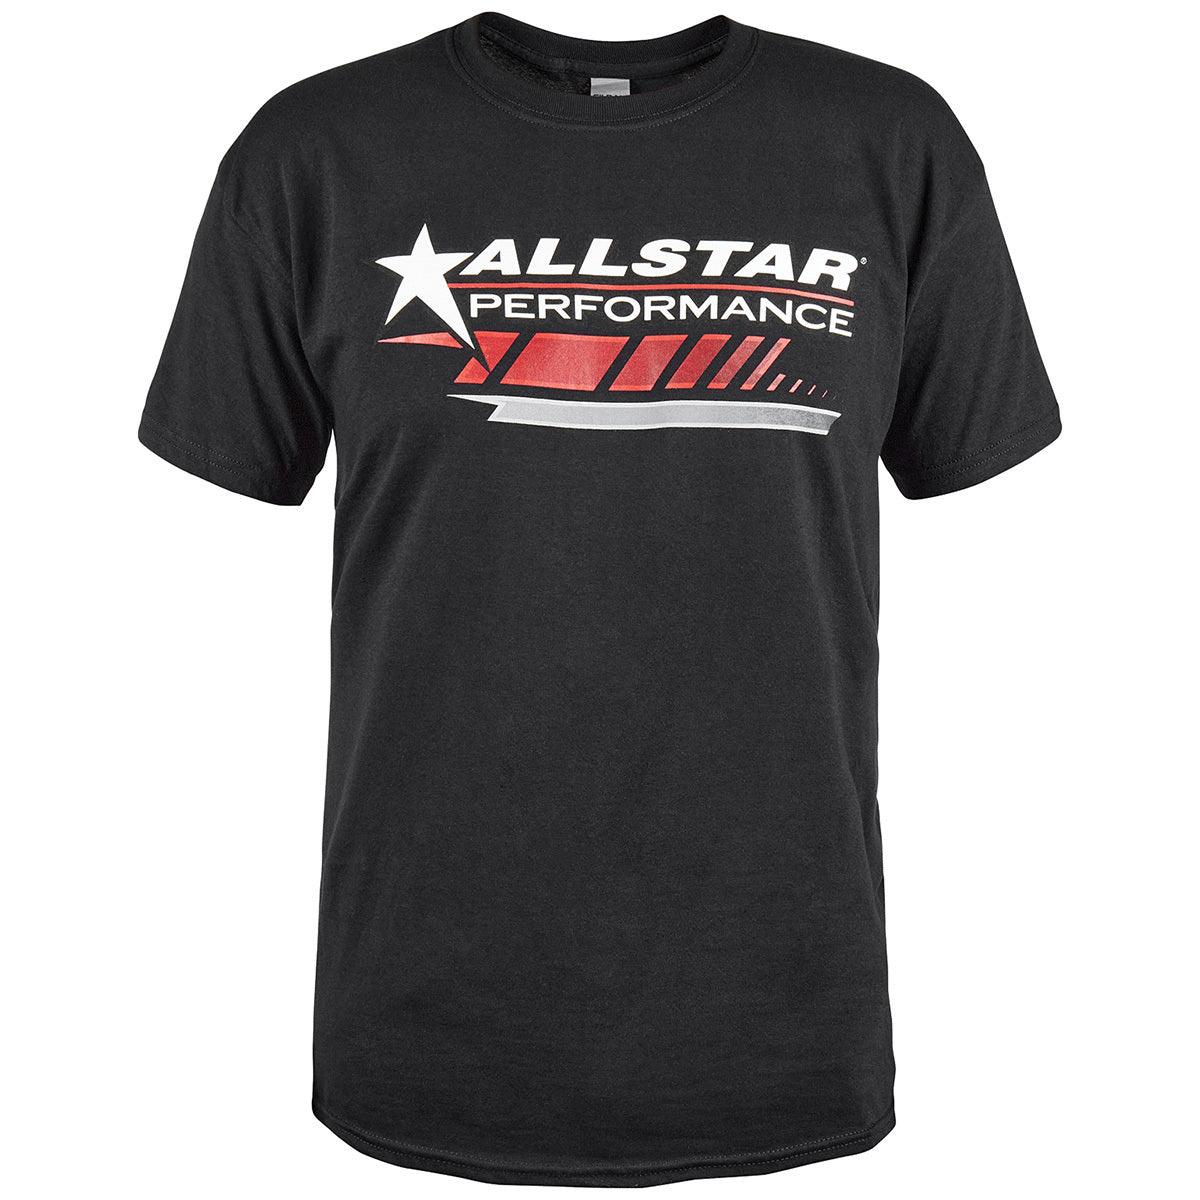 Allstar T-Shirt Black w/ Red Graphic Large - Burlile Performance Products